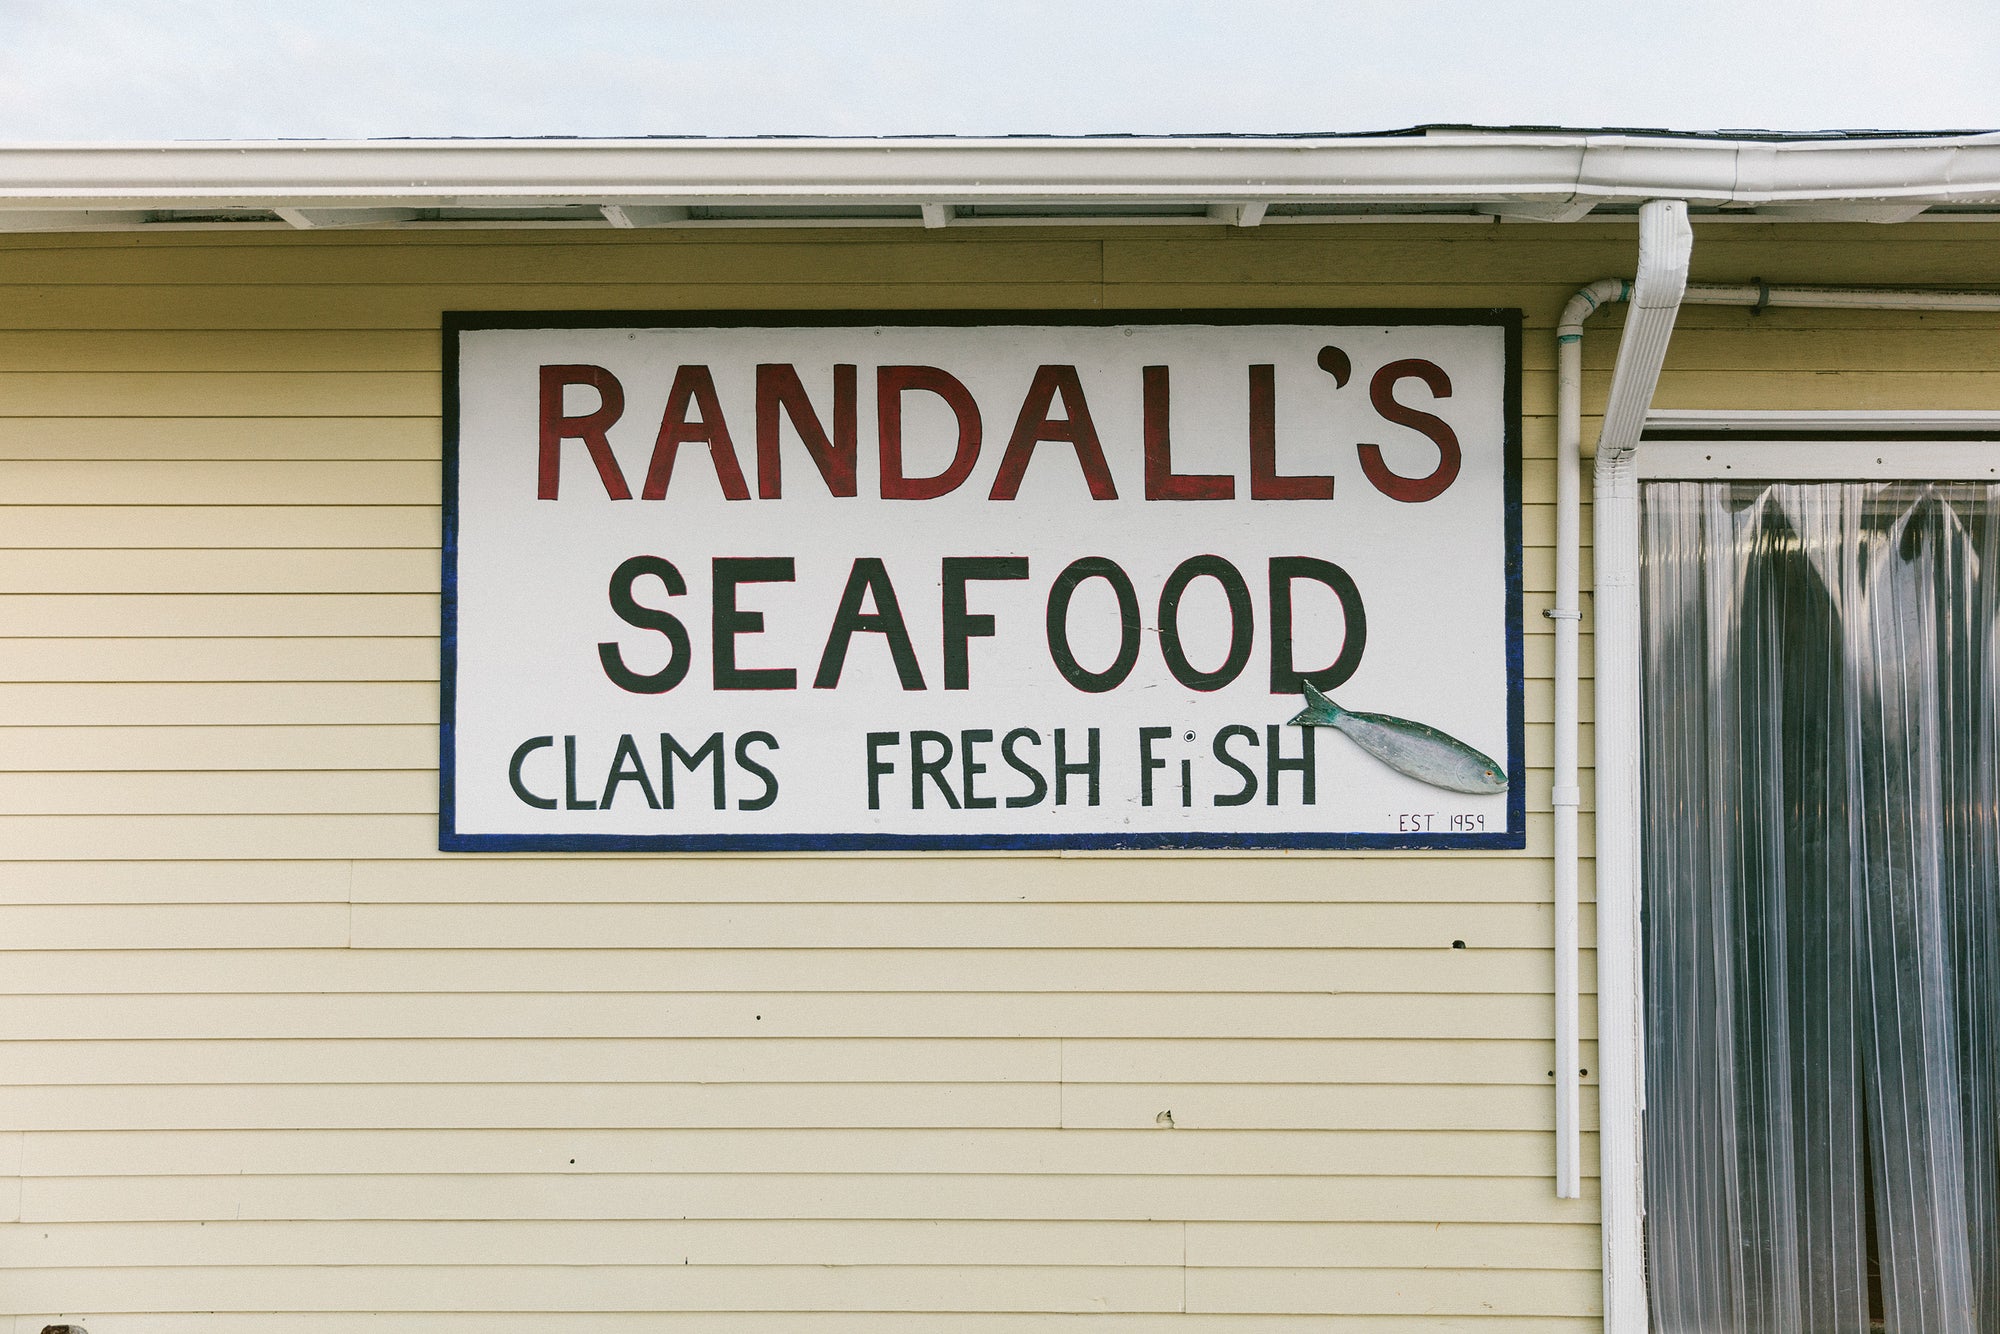 The hand painted sign at Randall's seafood. It says the name of the store and also "clams, fresh fish"